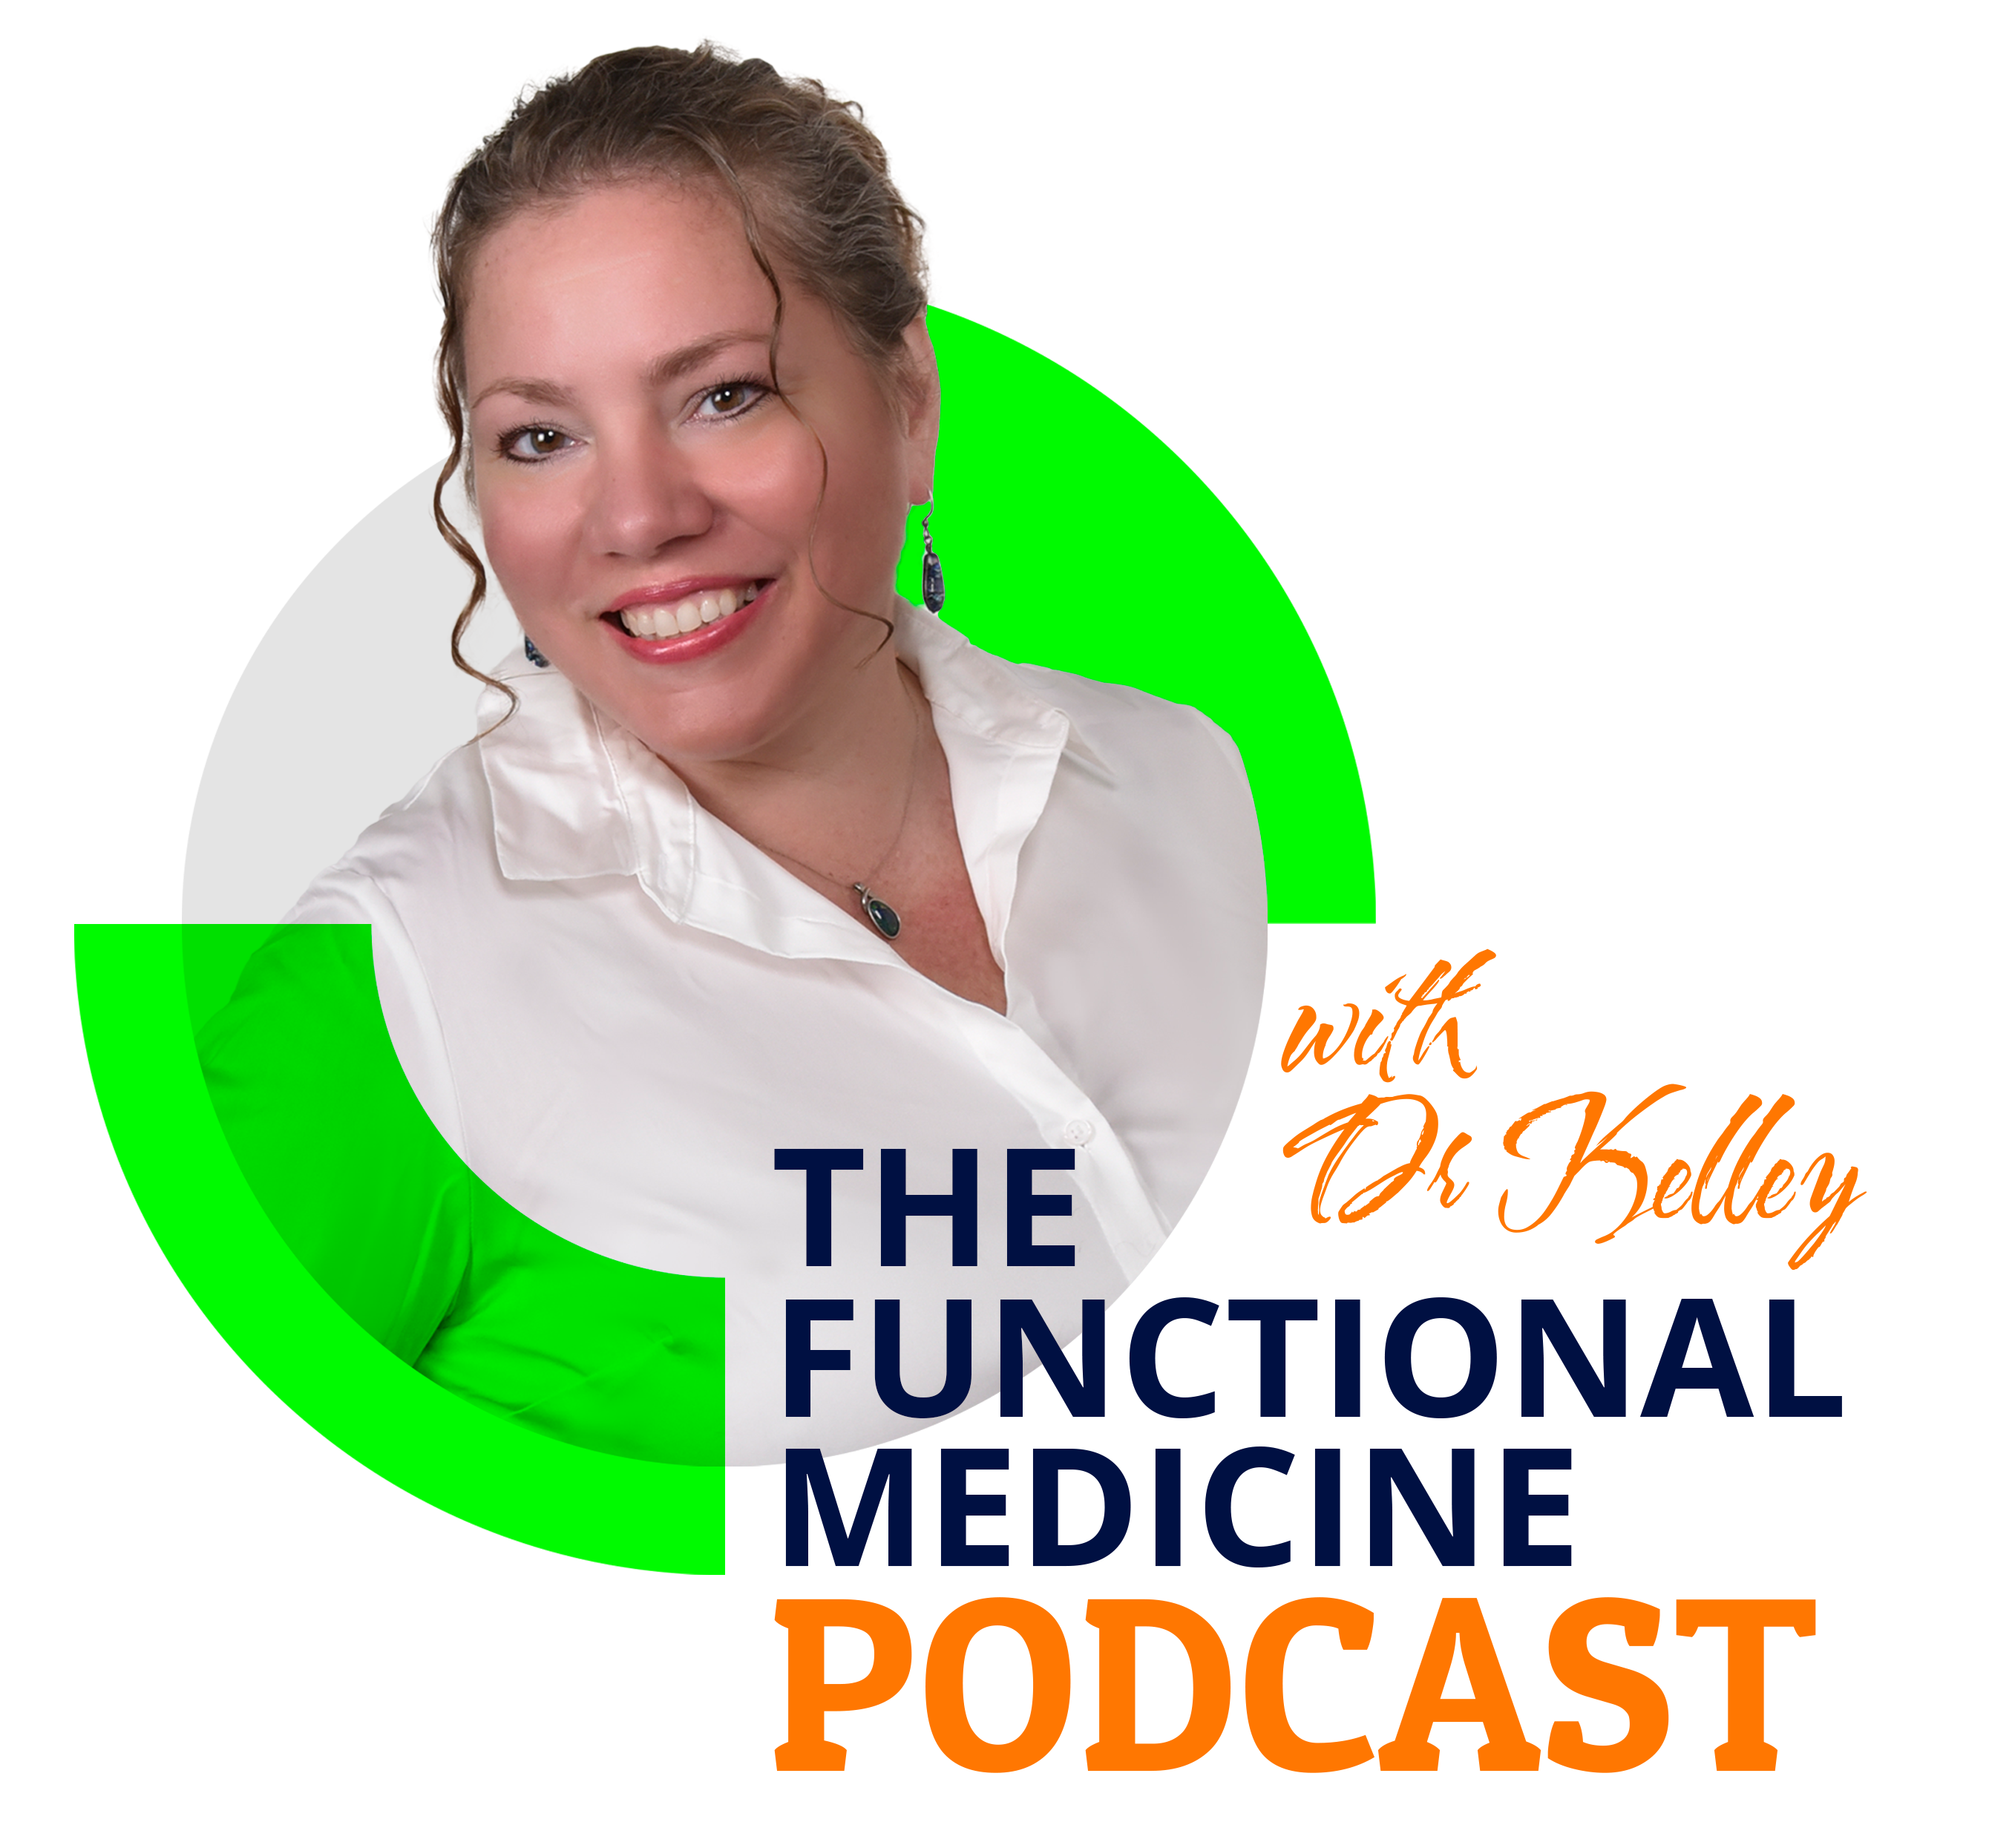 The Functional Medicine Podcast